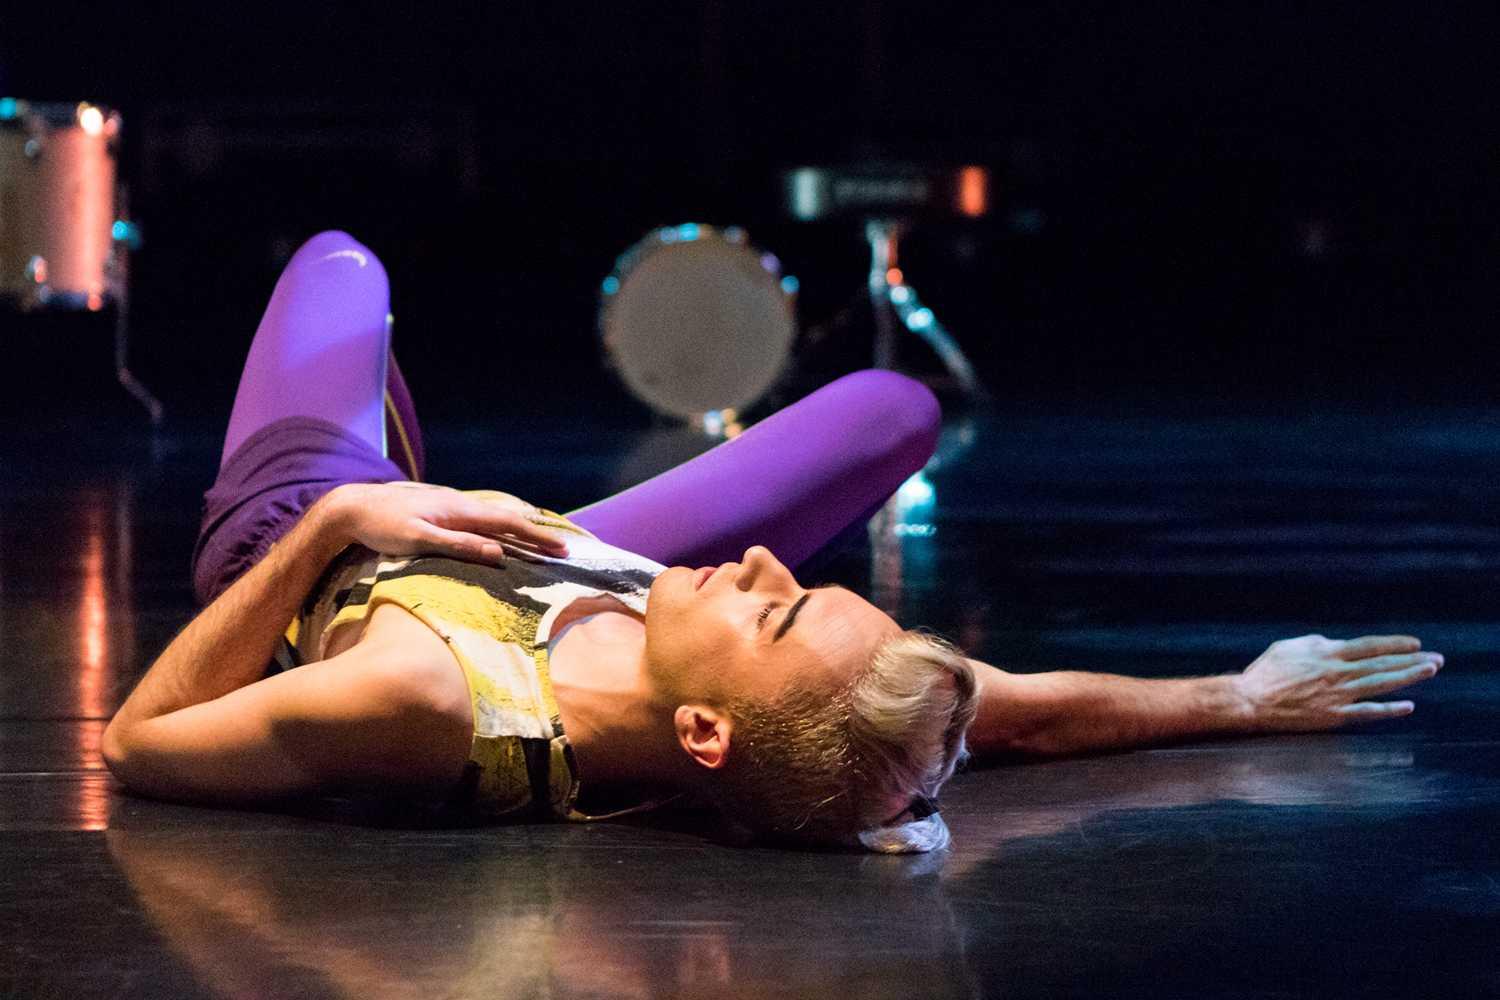 Dancer laying on ground with arm outstretched